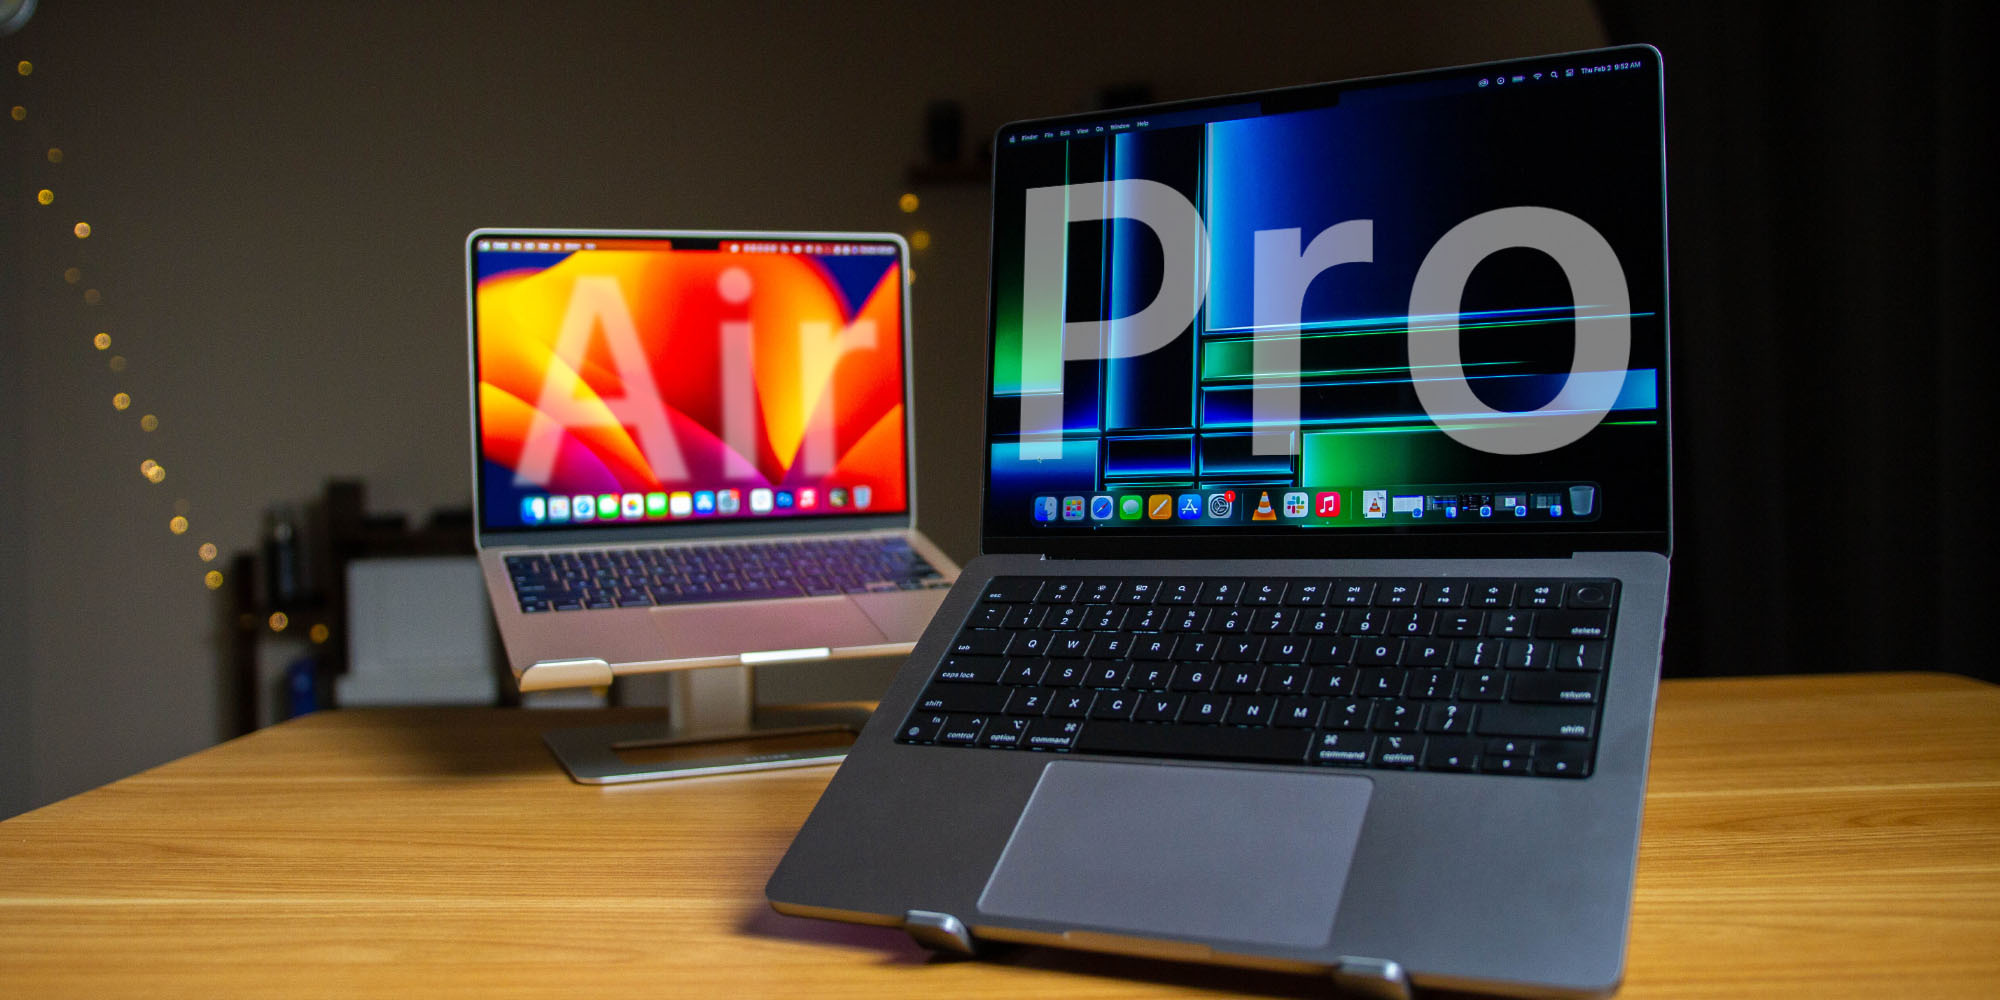 MacBook Air vs Pro: Differences between MacBook Air and Pro